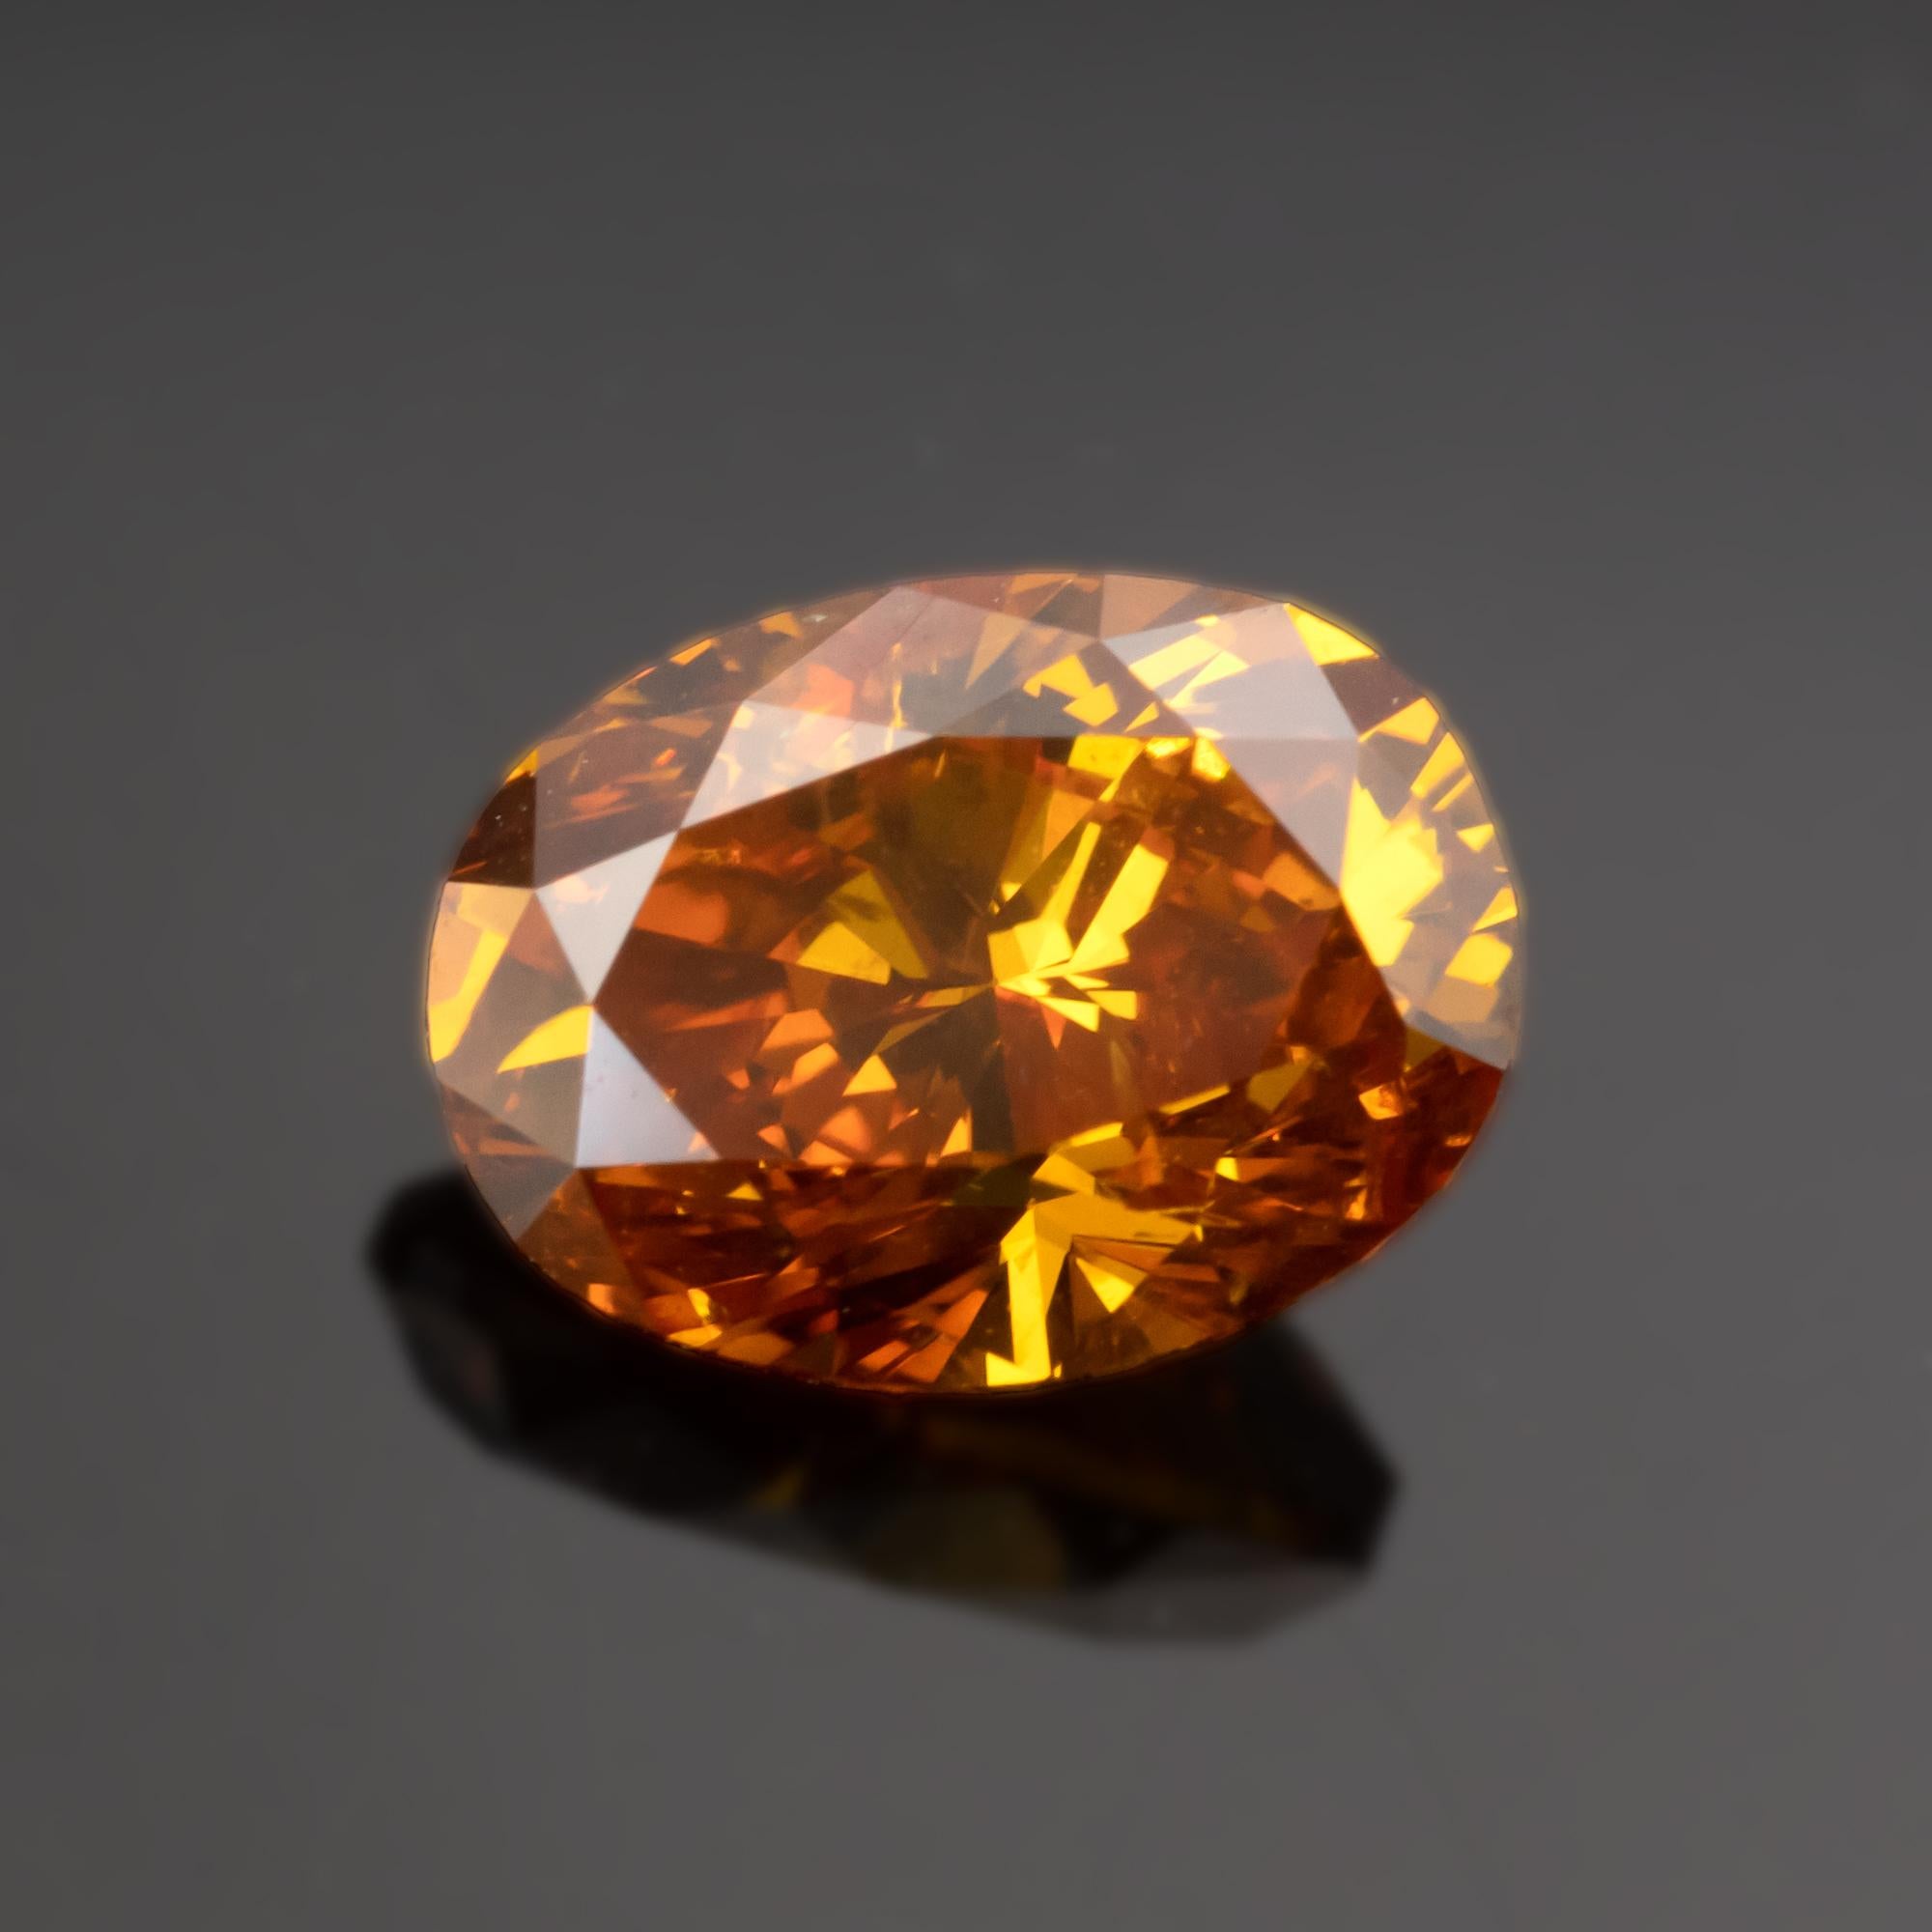 Contemporary Certified Fancy Vivid Yellowish Orange Diamond Engagement Halo Ring For Sale